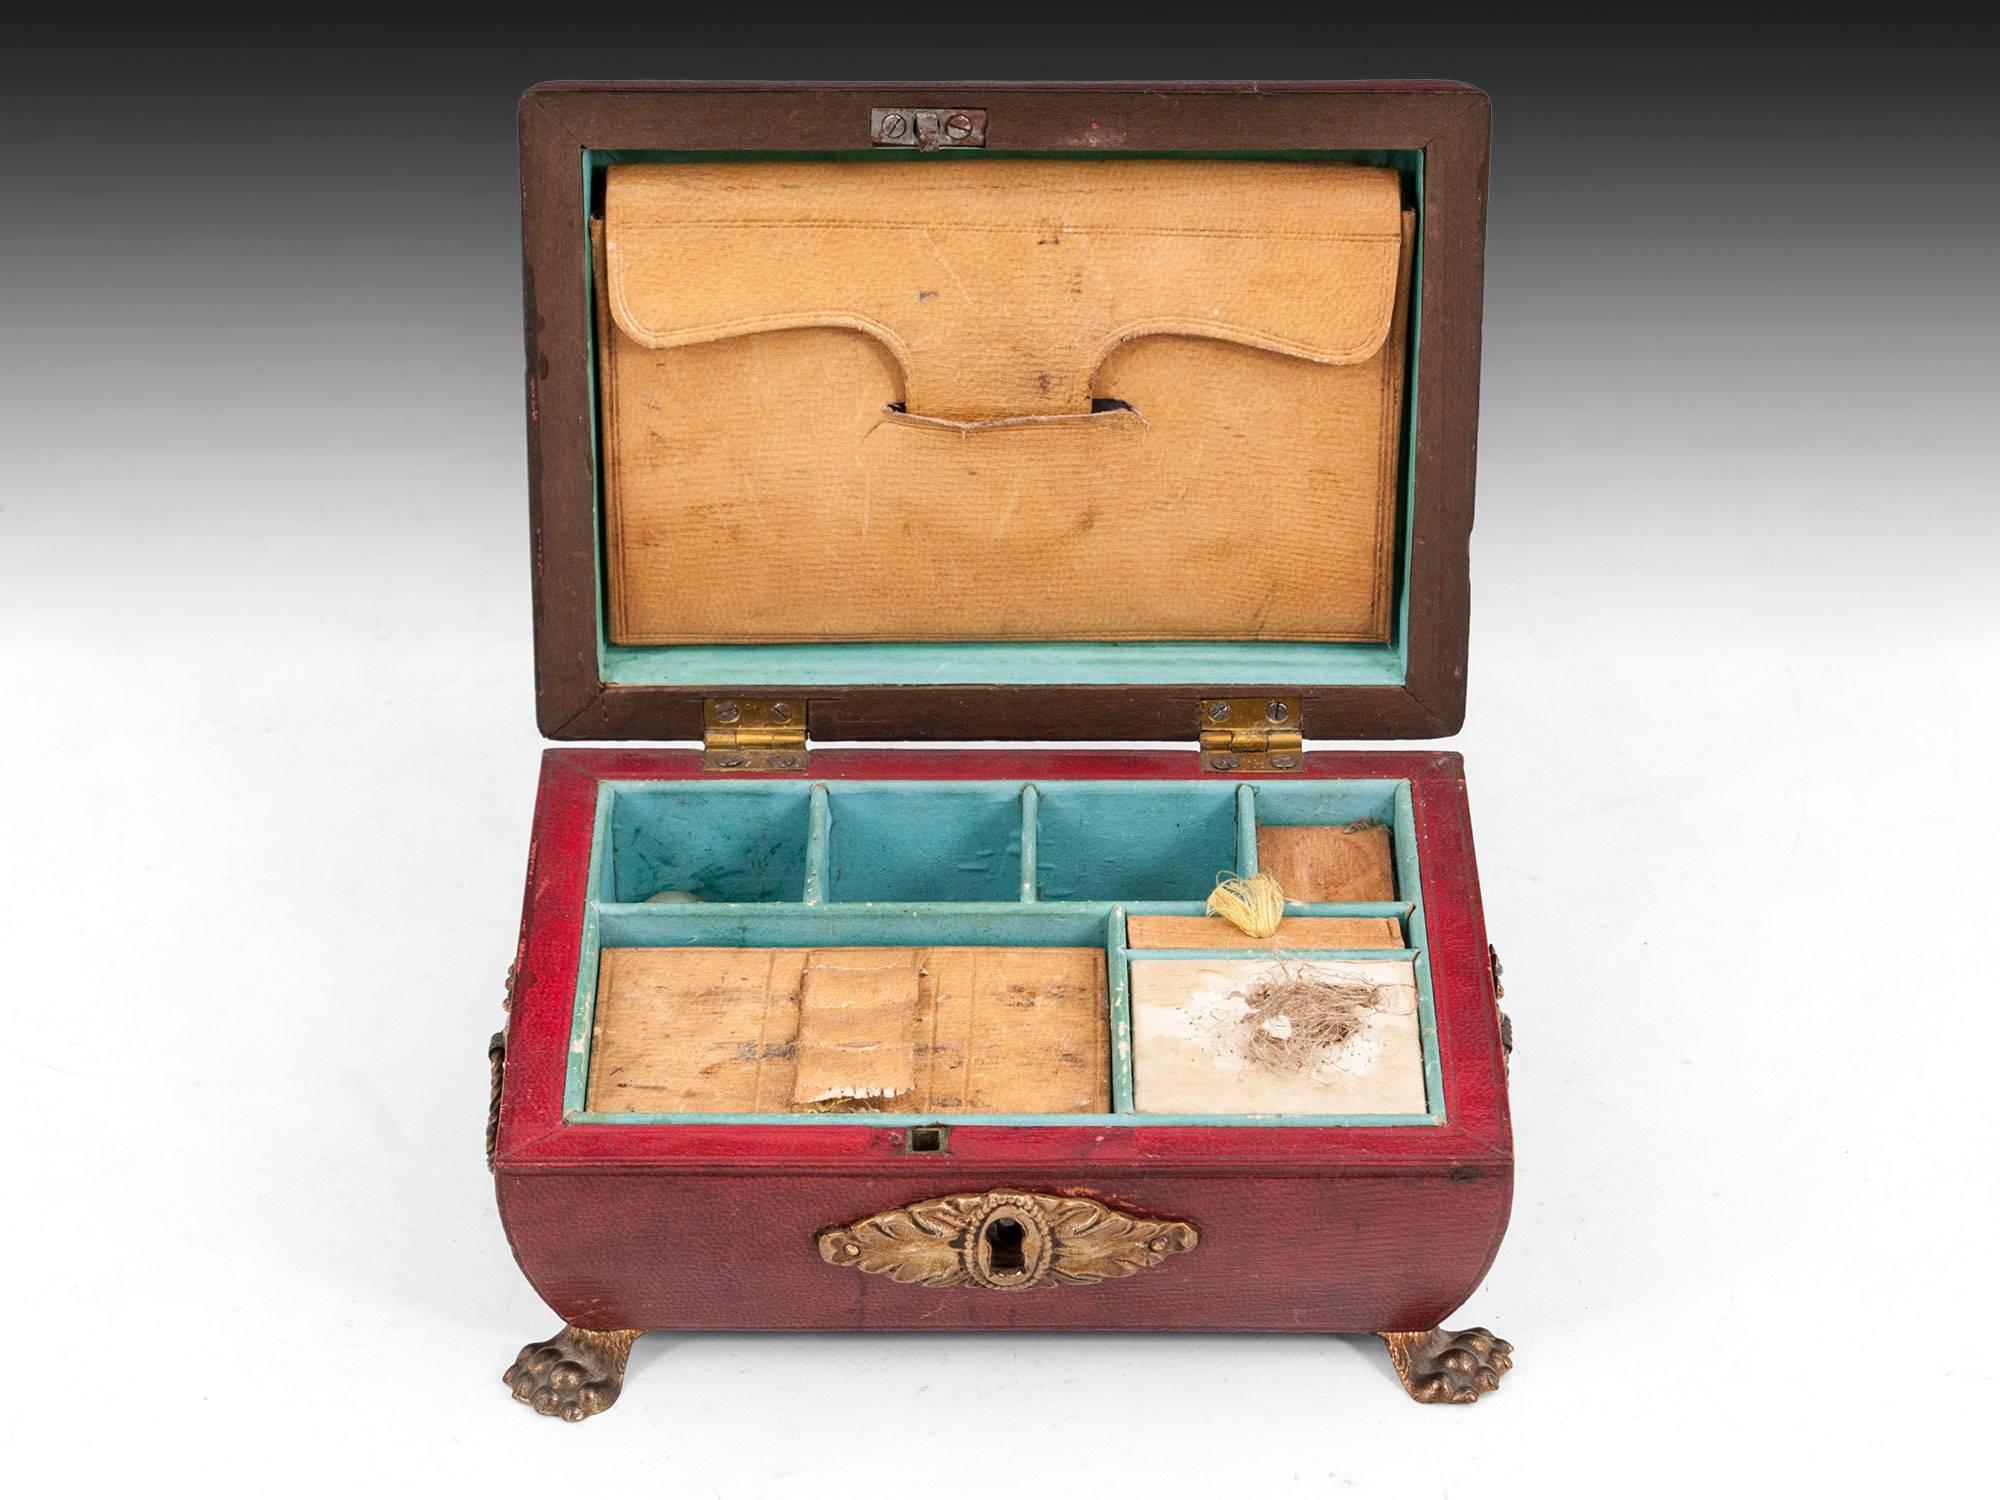 British Antique Miniature Regency Red Leather Sewing Box